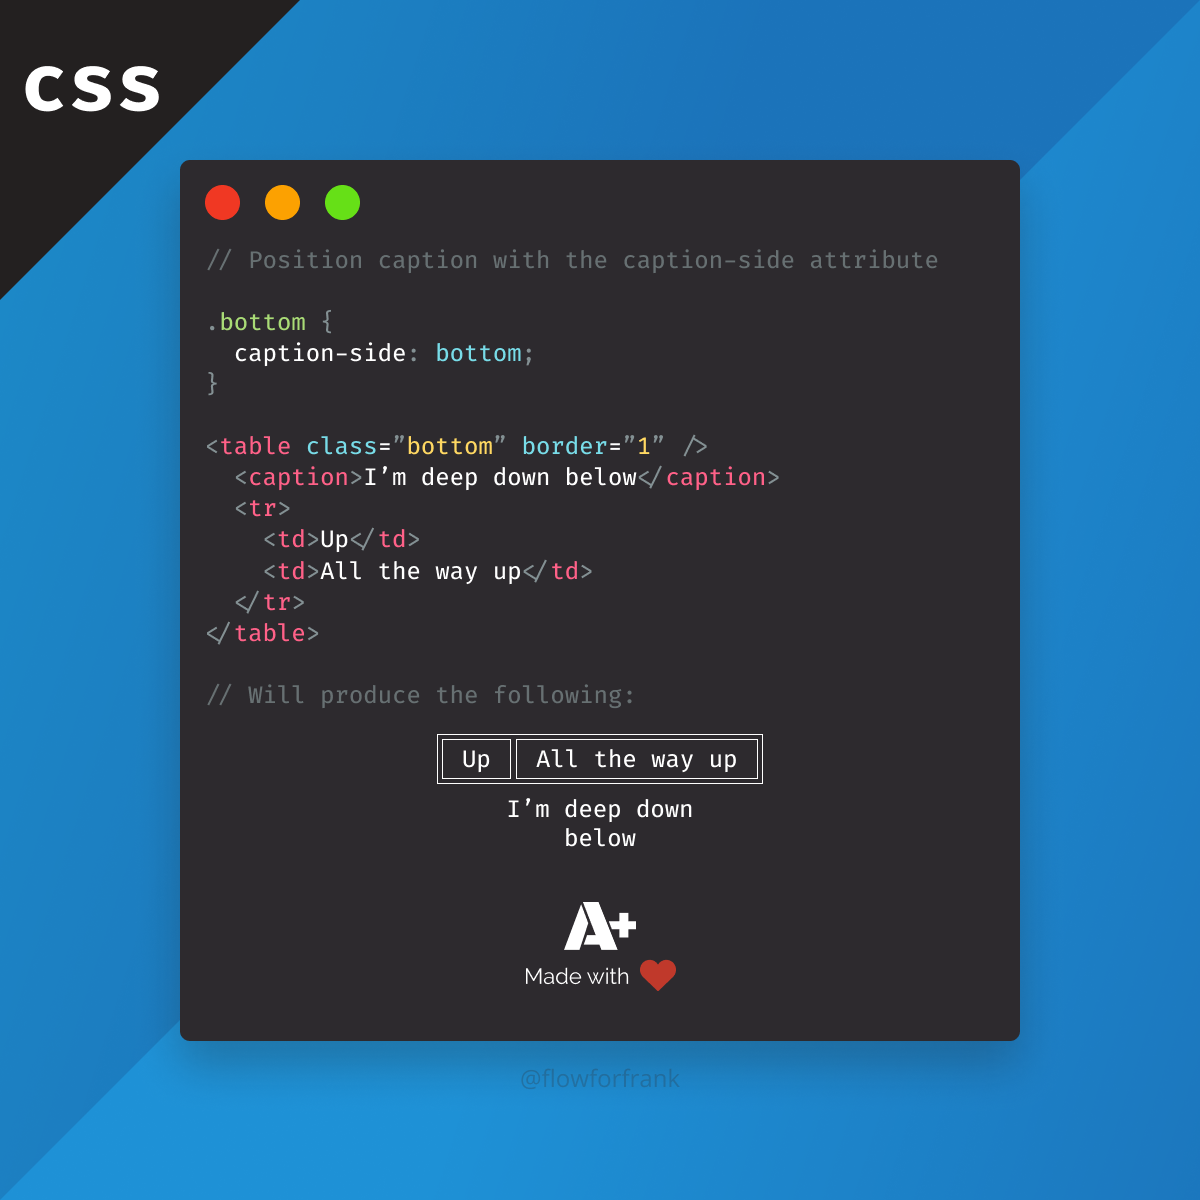 How to position captions for tables in CSS